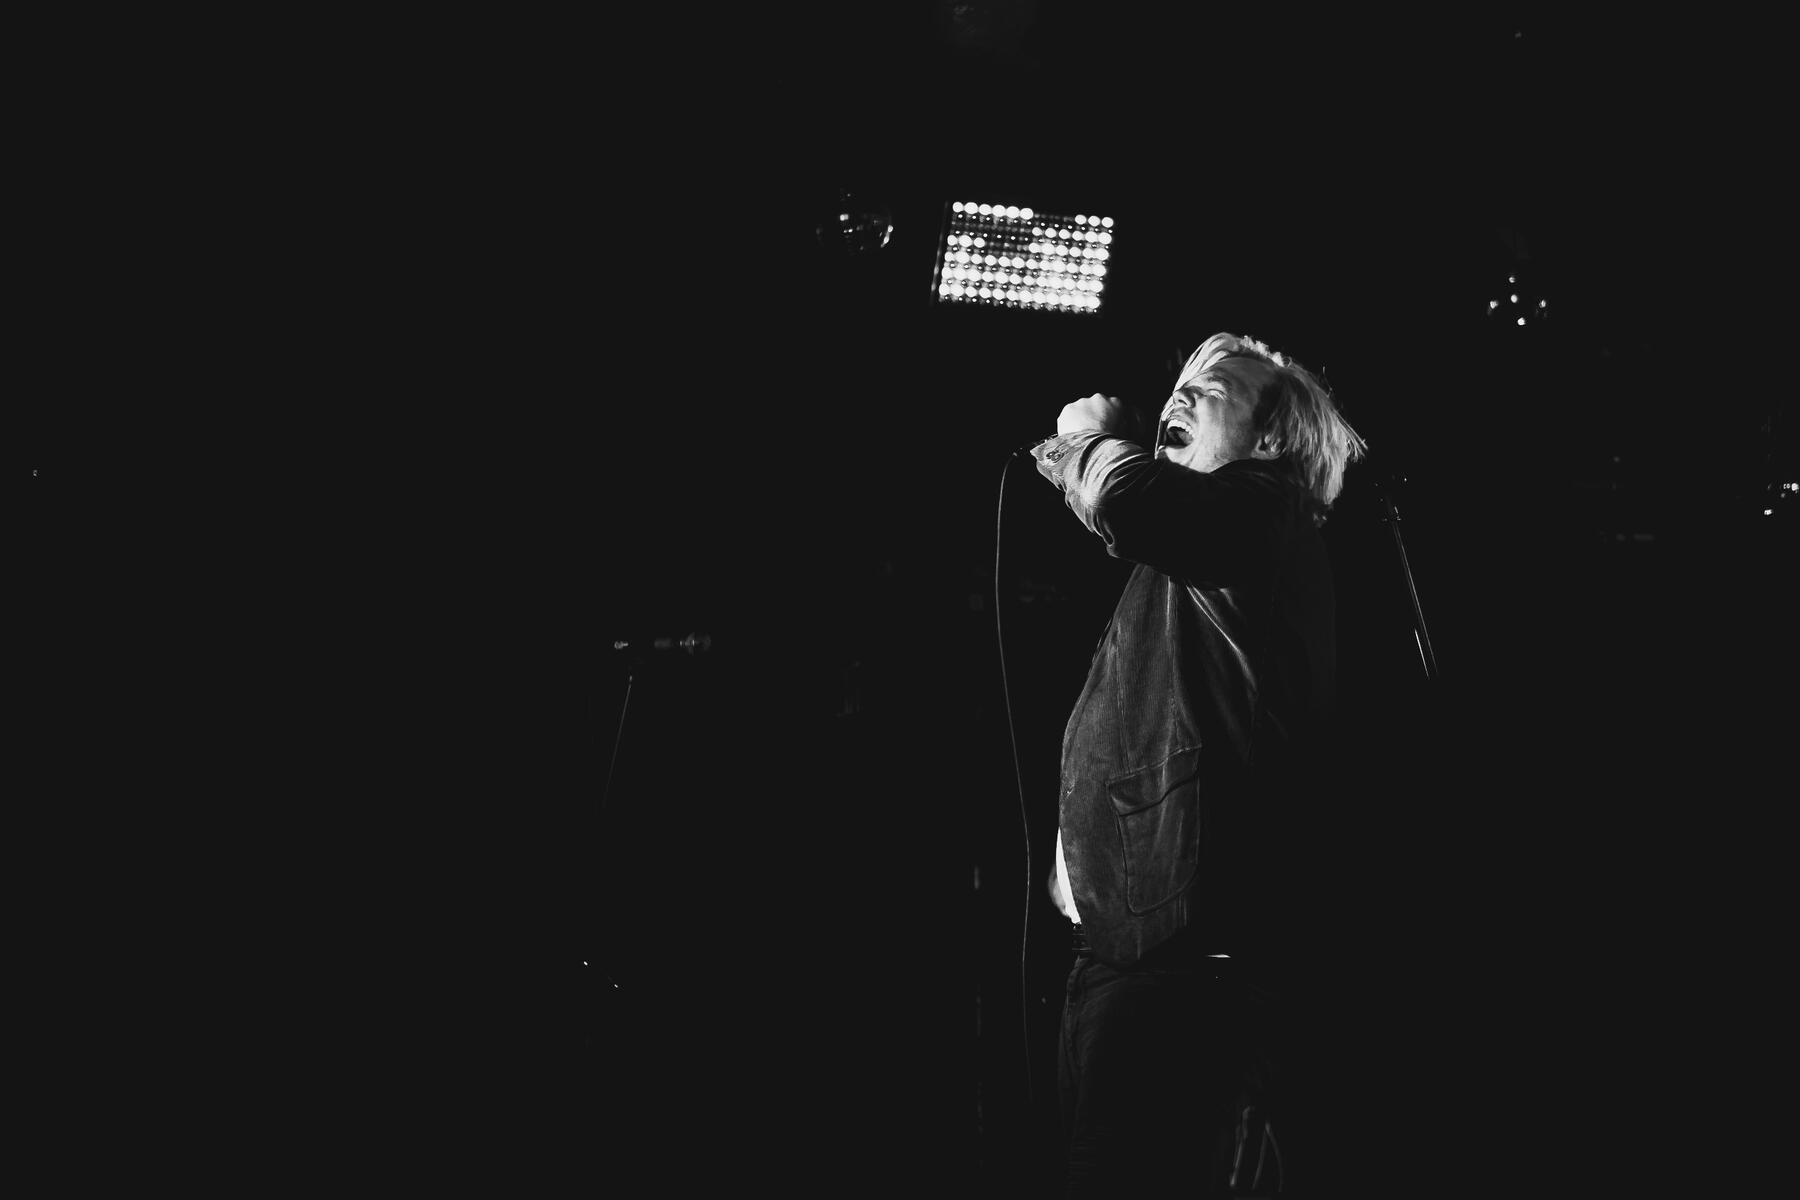 Black and white of lead vocalist singing a key into mic. Band is "Silverstone Hills"